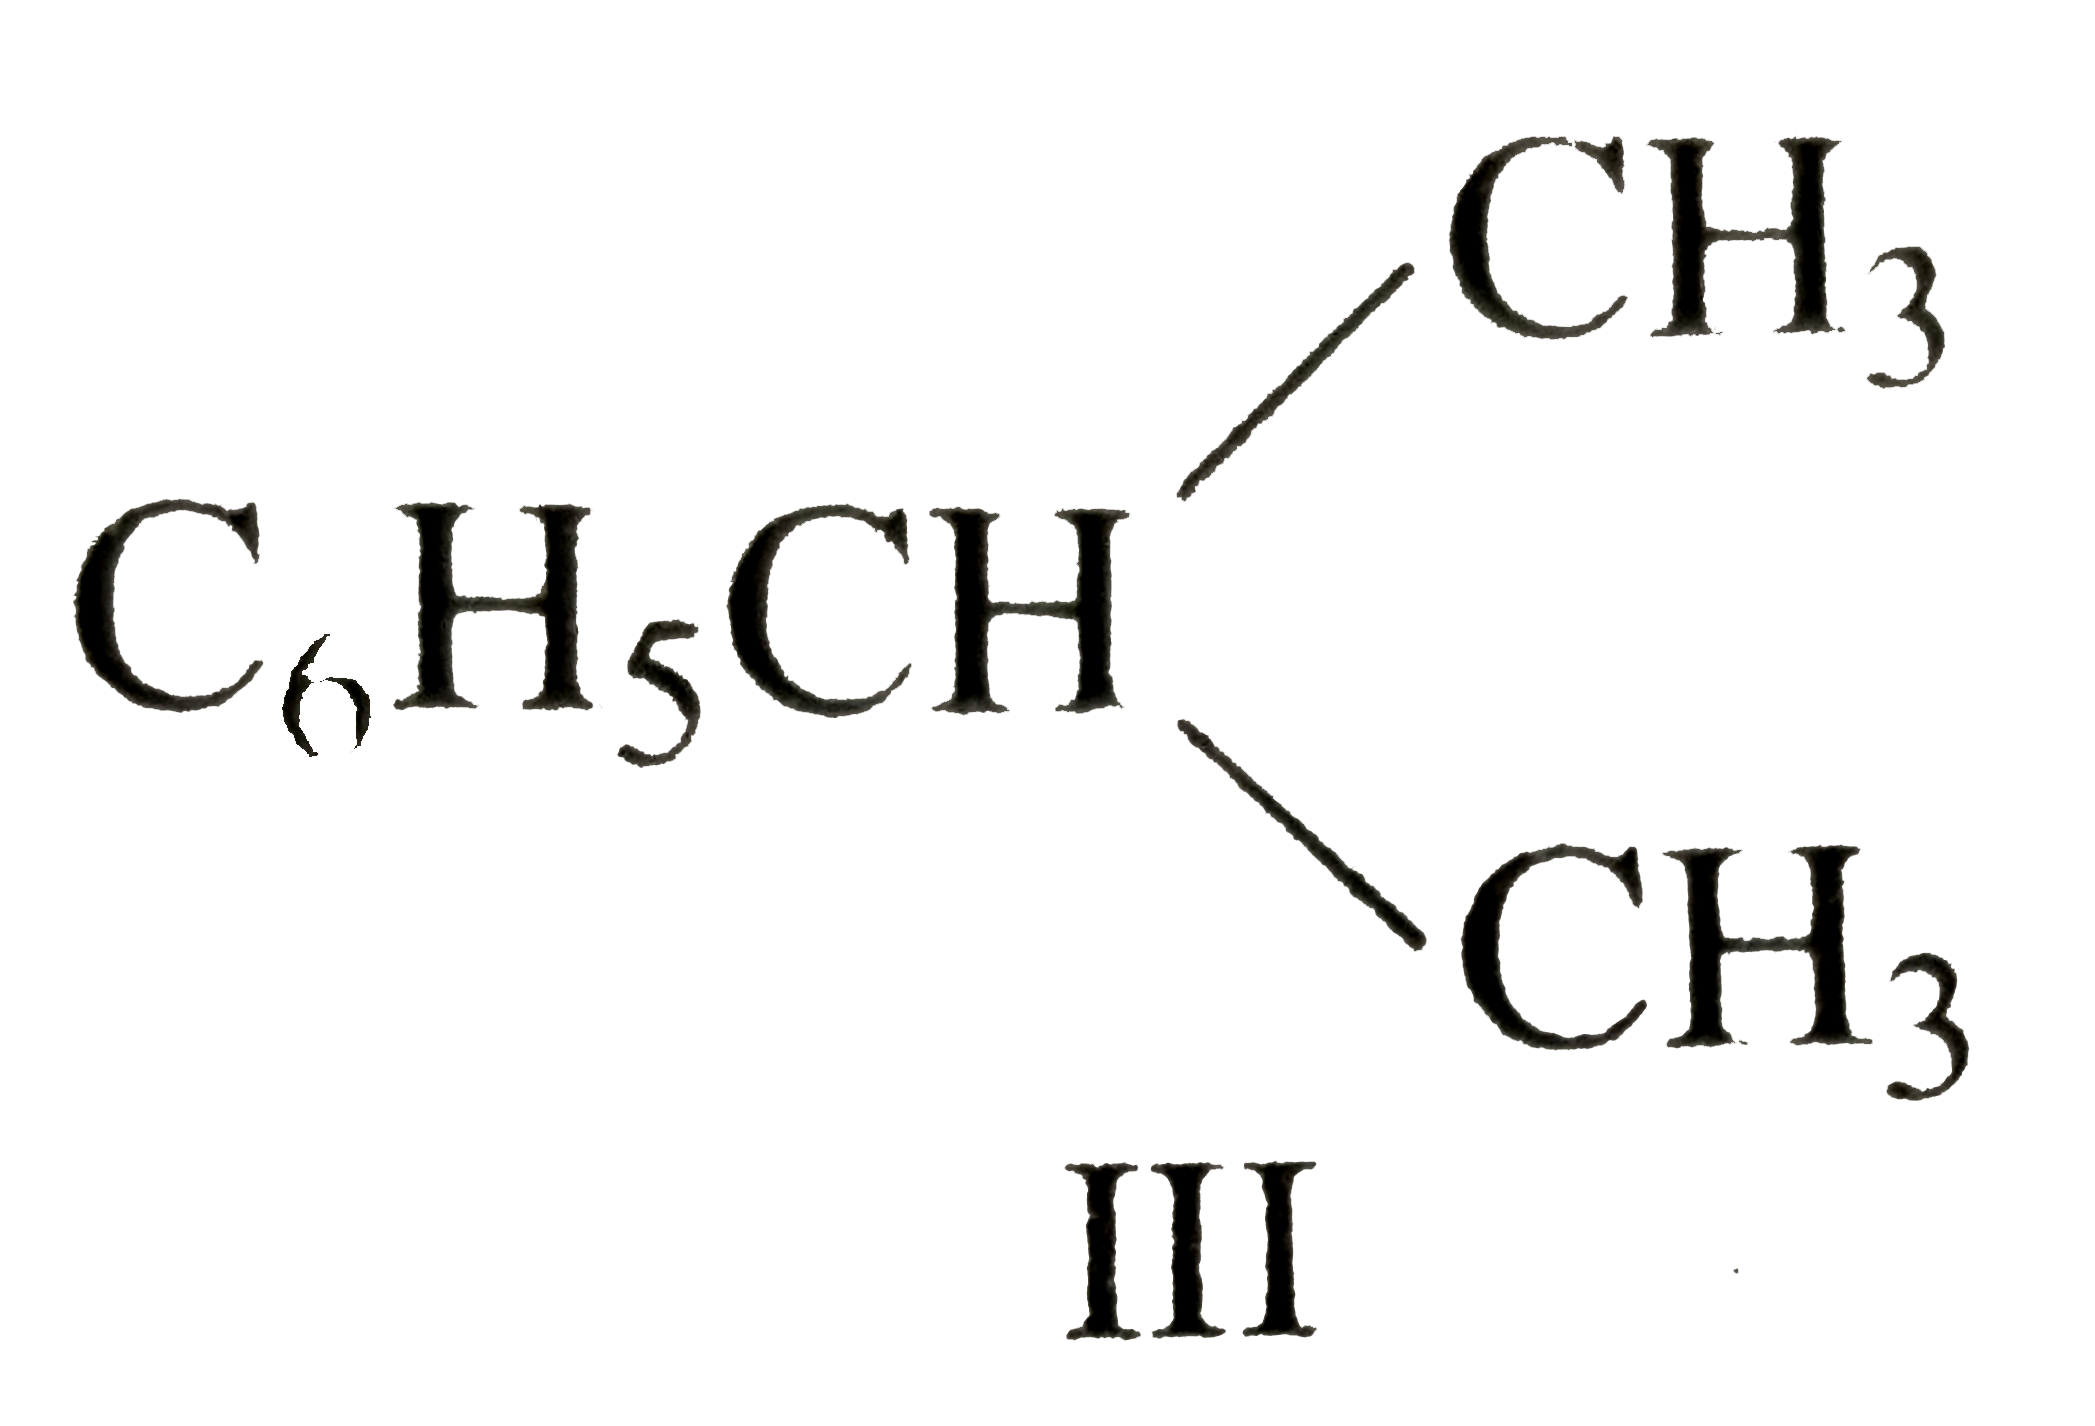 The order of reactivity of the  following compounds    C(6)H(5)CH(3) C(6)H(5)CH(2)CH(3)   towards electrophilic substritution will be :